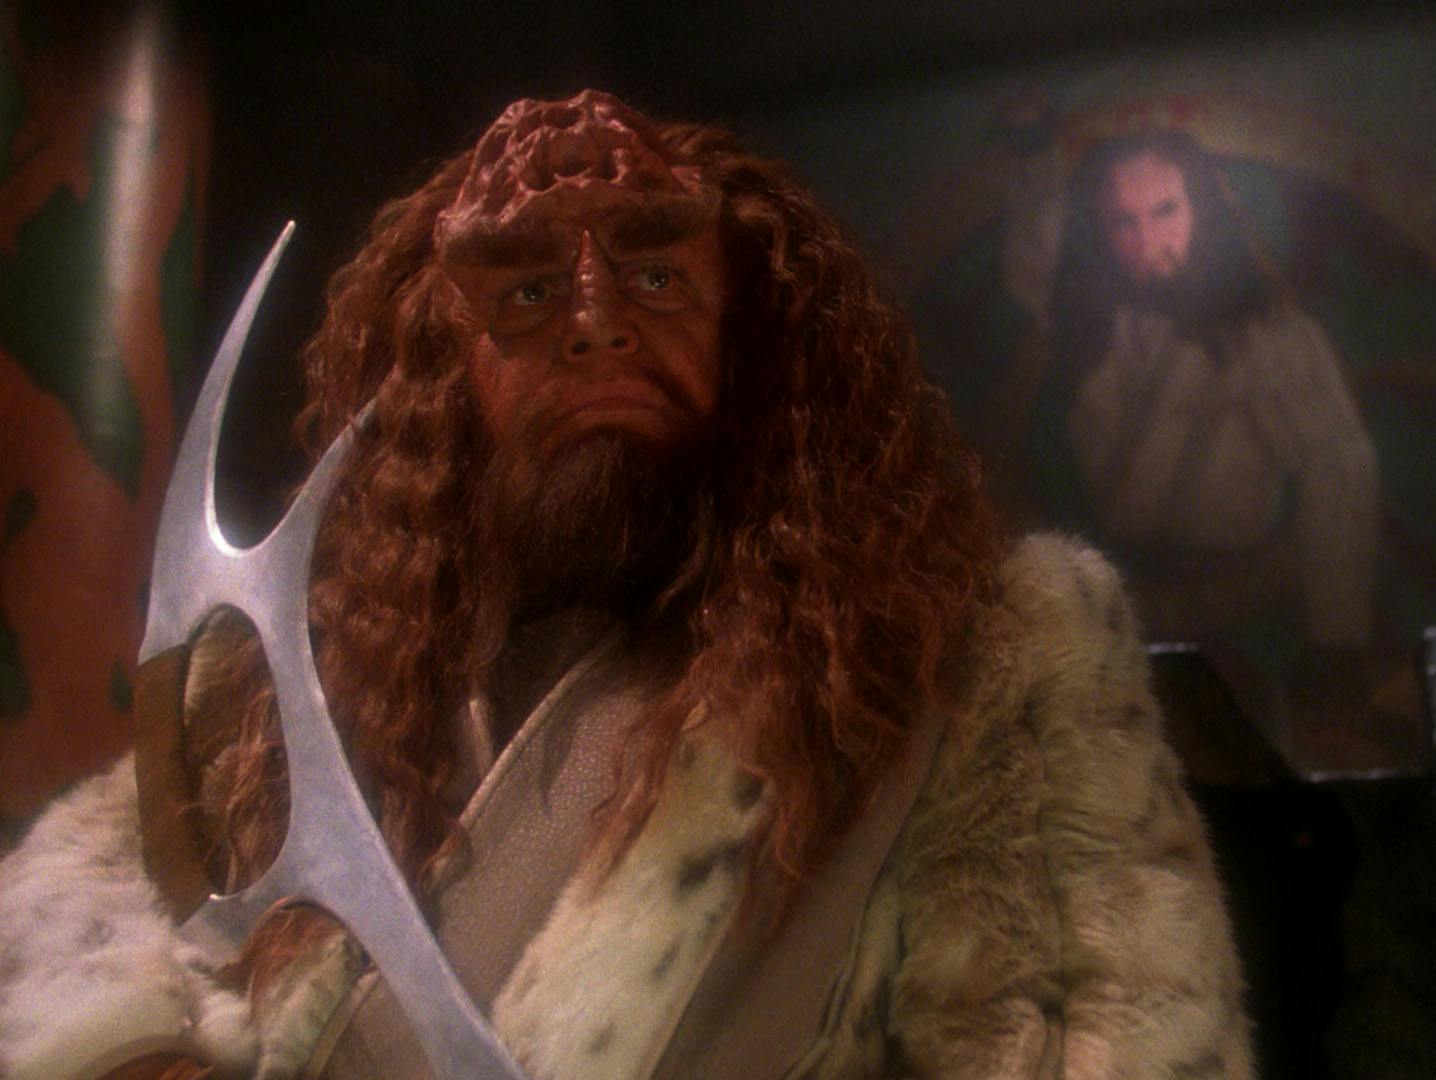 In the temple on Boreth, Kahless (the clone) recalls how his bat'leth was created in 'Rightful Heir'